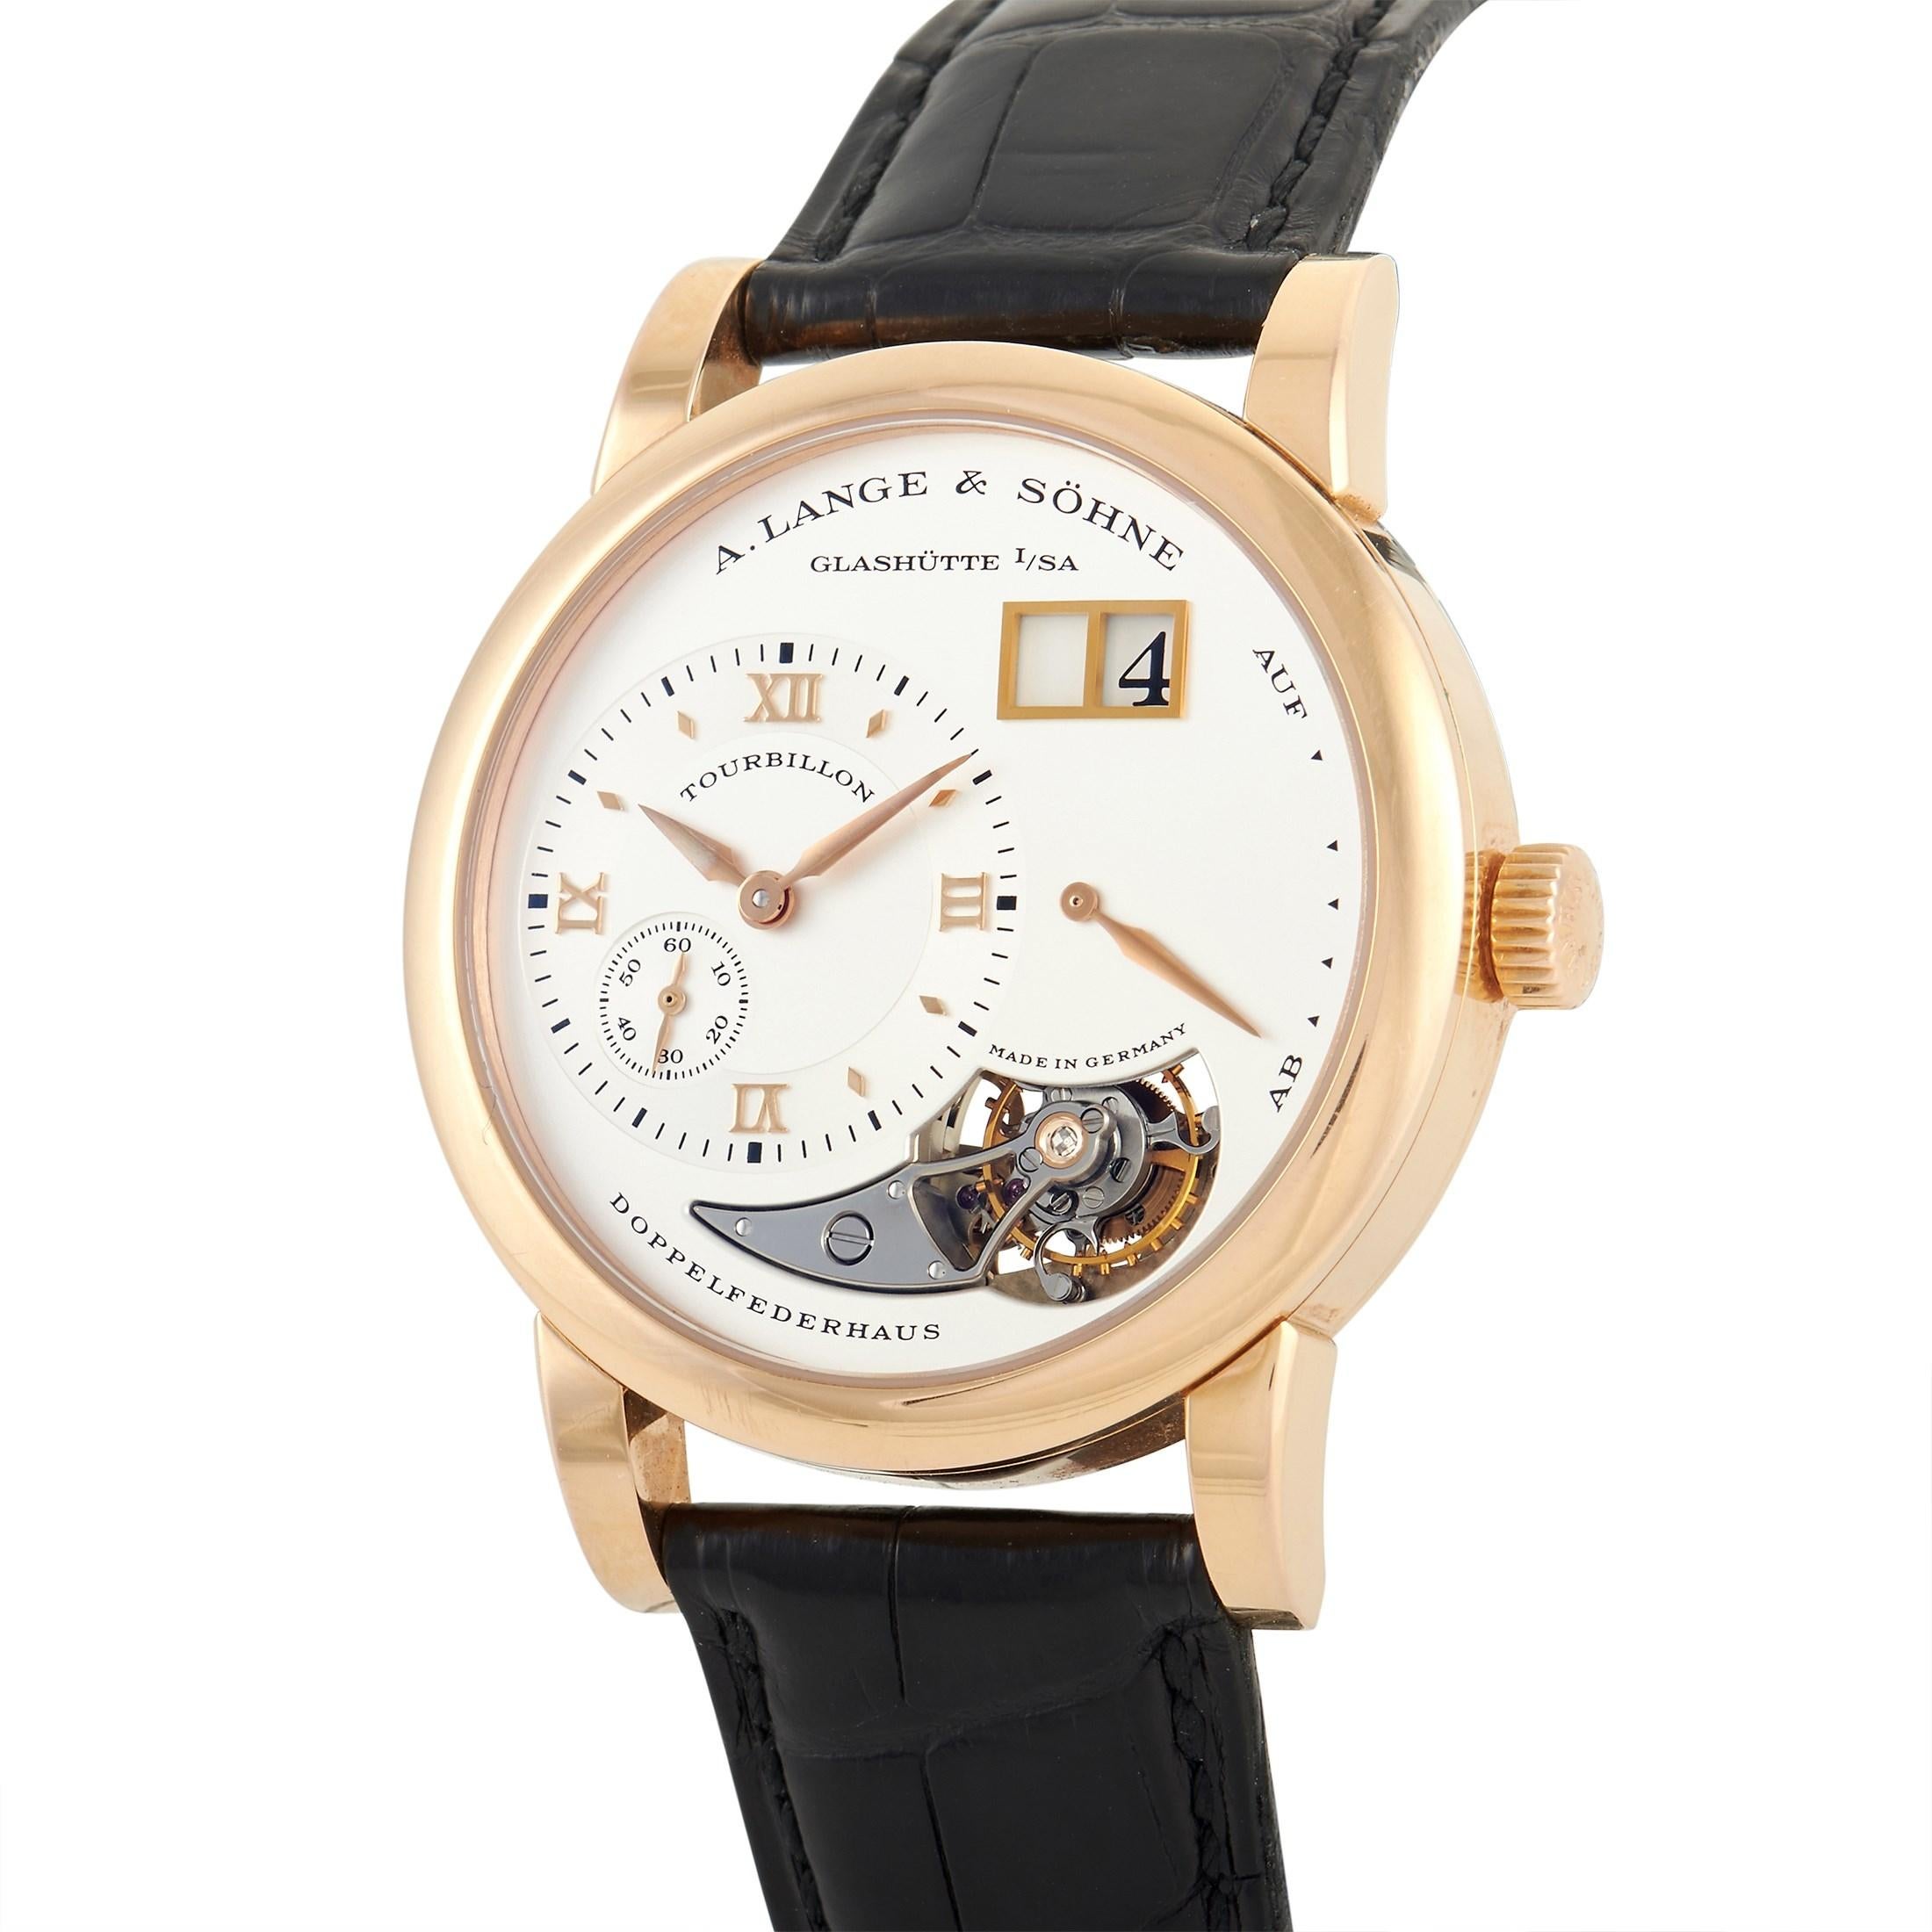 A limited edition timepiece, this Lange 1 Tourbillon 704.032 comes with an 18K rose gold case measuring 38.5mm in diameter. The three-body case, bezel, and curved lugs are all polished. It has a rhodium silver dial with 18K rose gold sword hands,